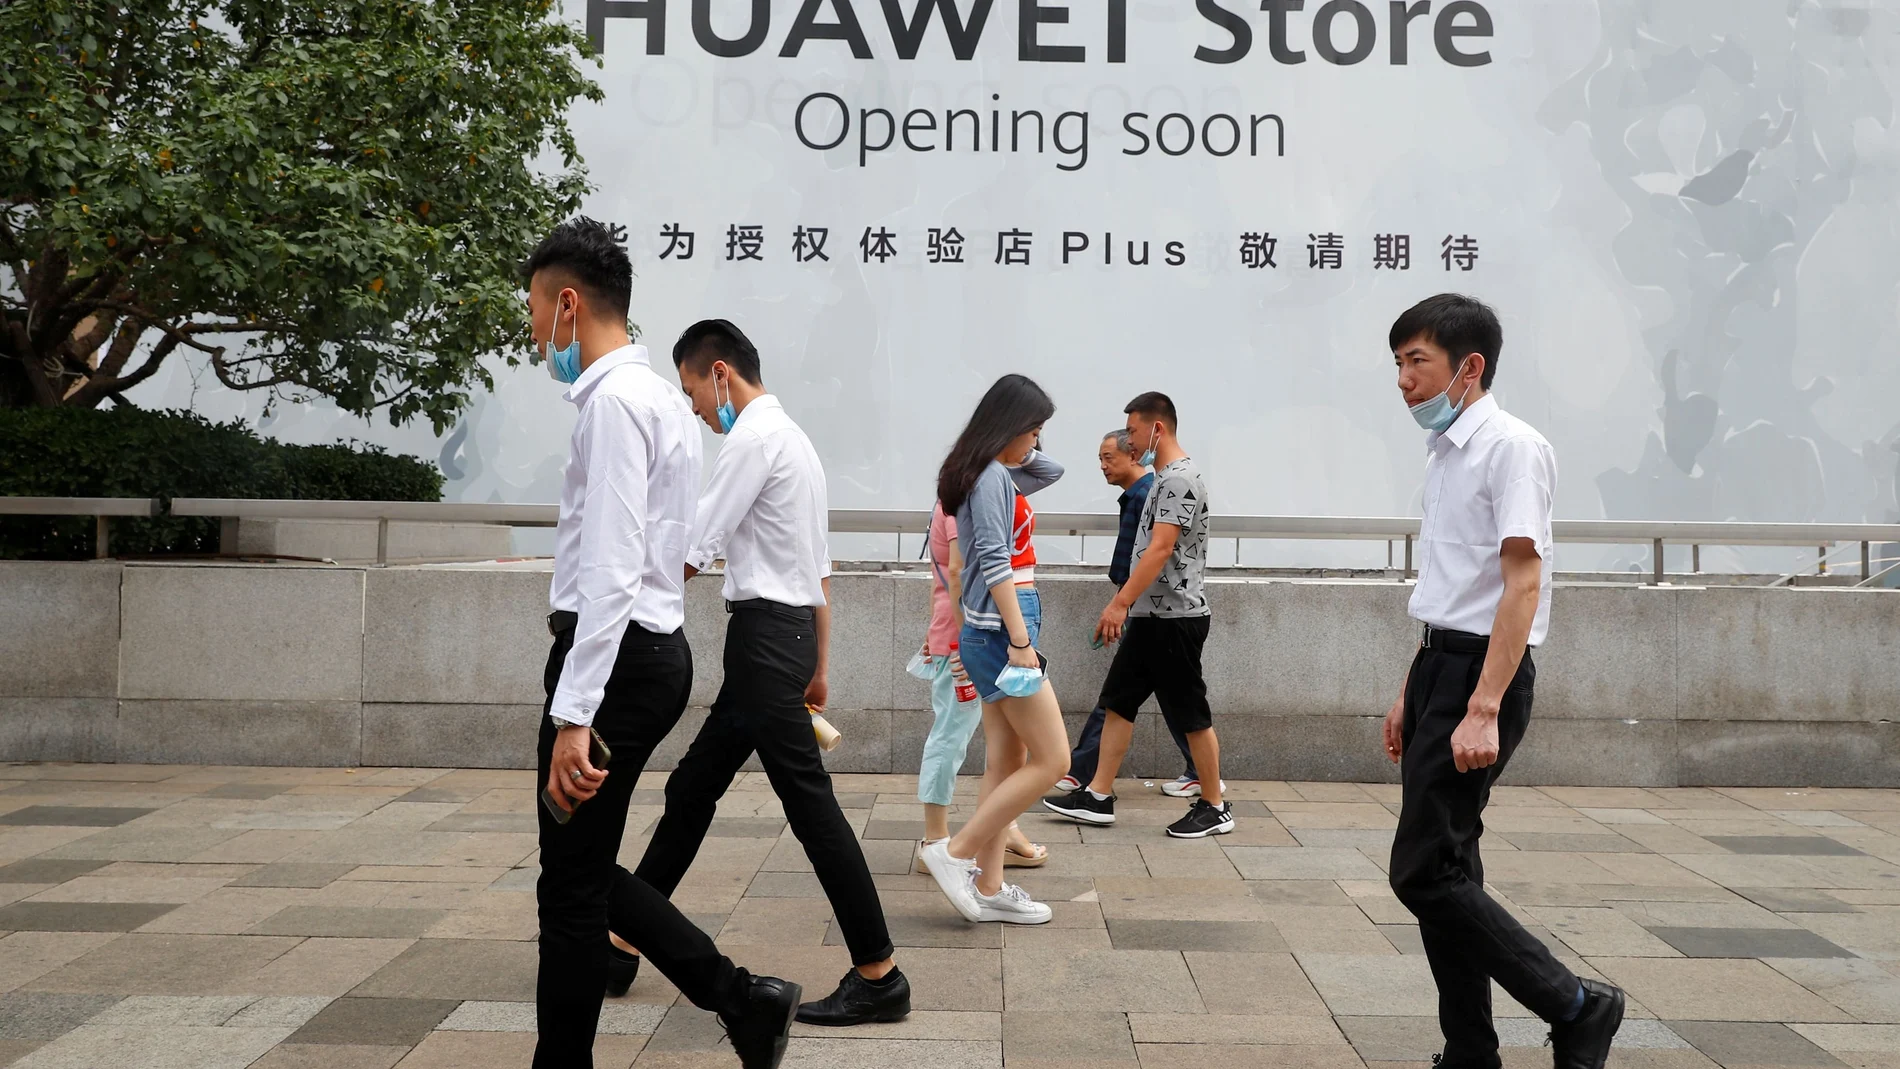 People walk past an advertisement announcing the opening of a HUAWEI store in Beijing